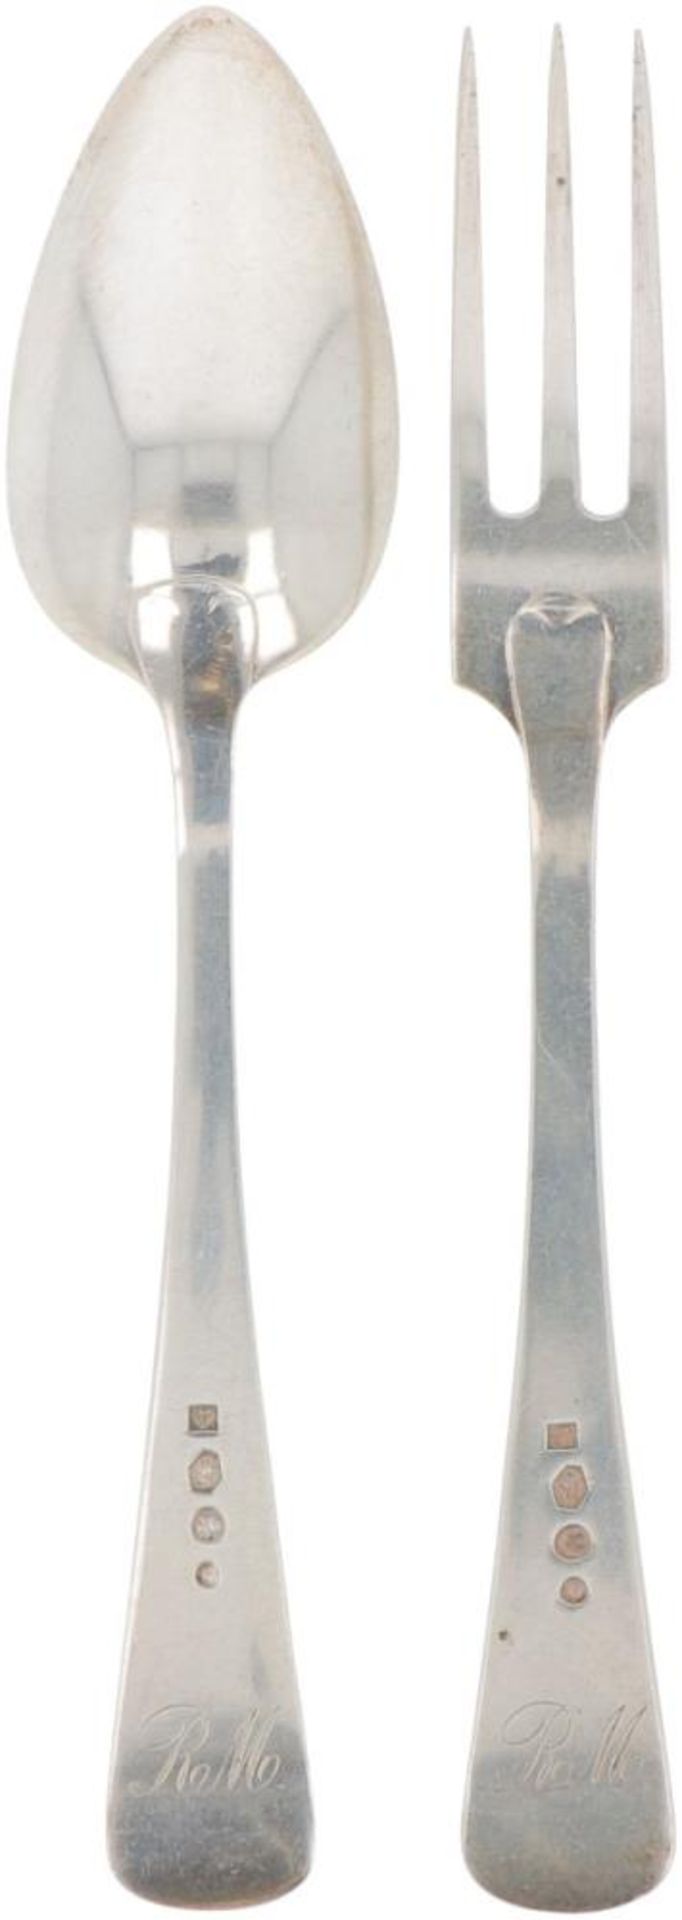 (12) piece set spoons & forks "Haags Lofje" silver. - Image 3 of 4